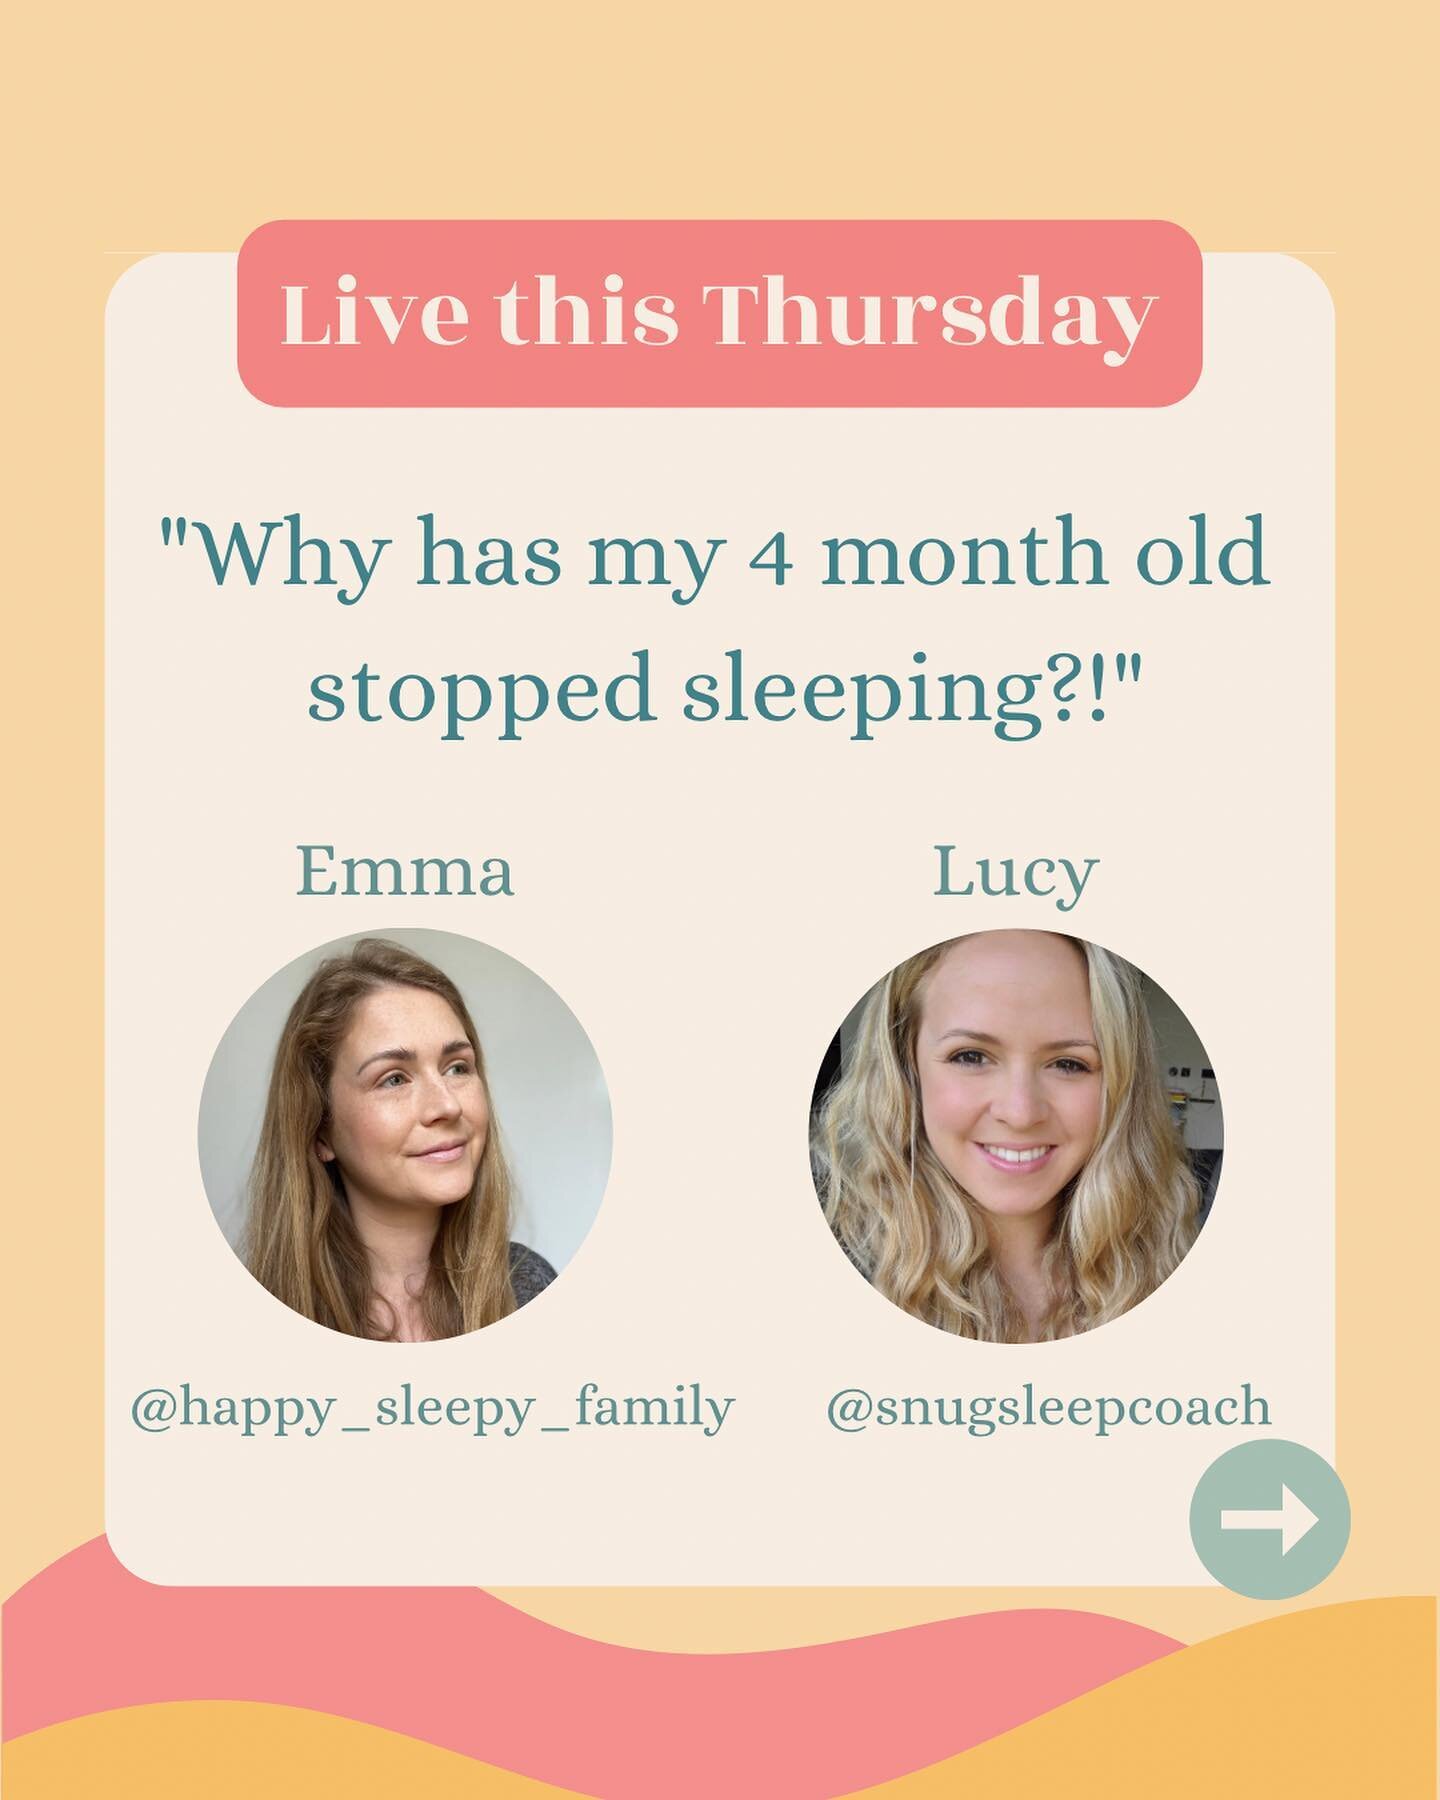 📣 Join us, Emma from @happy_sleepy_family &amp; Lucy from @snugsleepcoach on Instagram Live on Thursday 18th May at 10am when we will be digging into what really goes on during the 4 month progression..! 

We are BOTH Holistic Sleep Coaches, so, we 